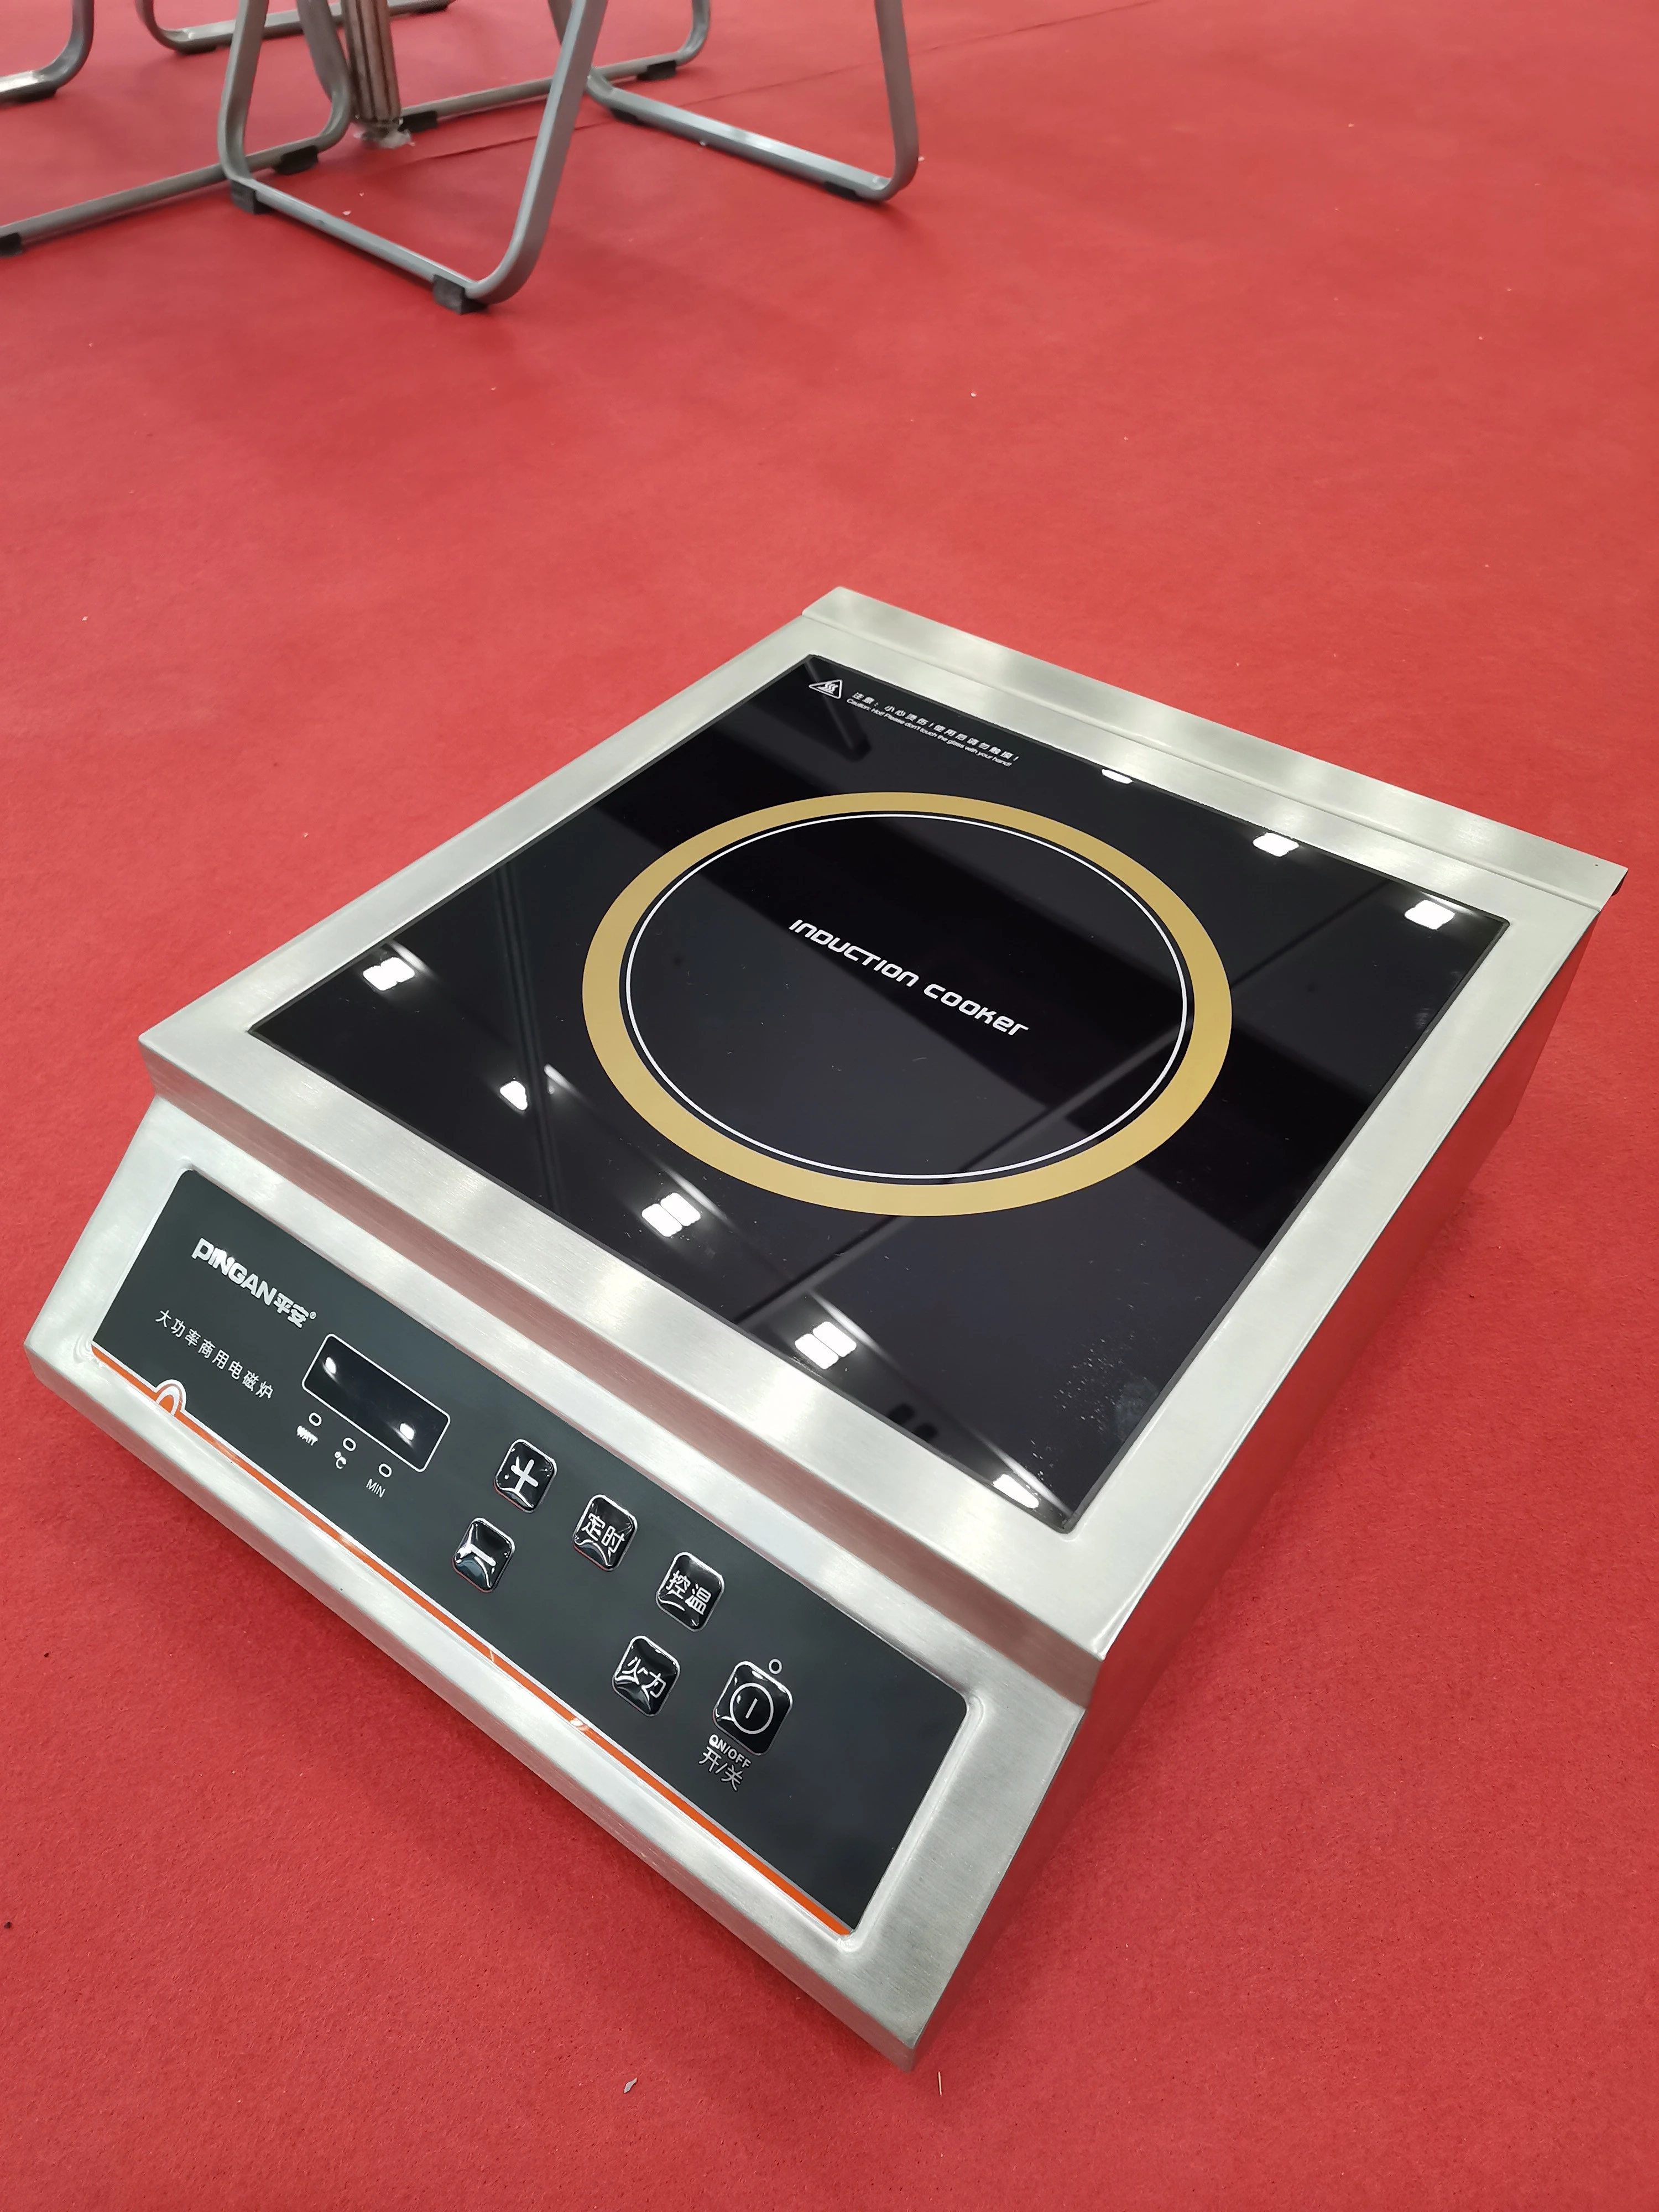 Ninestar NS.A-930 Big Power Induction Stove 3500W Commercial Induction Cooker